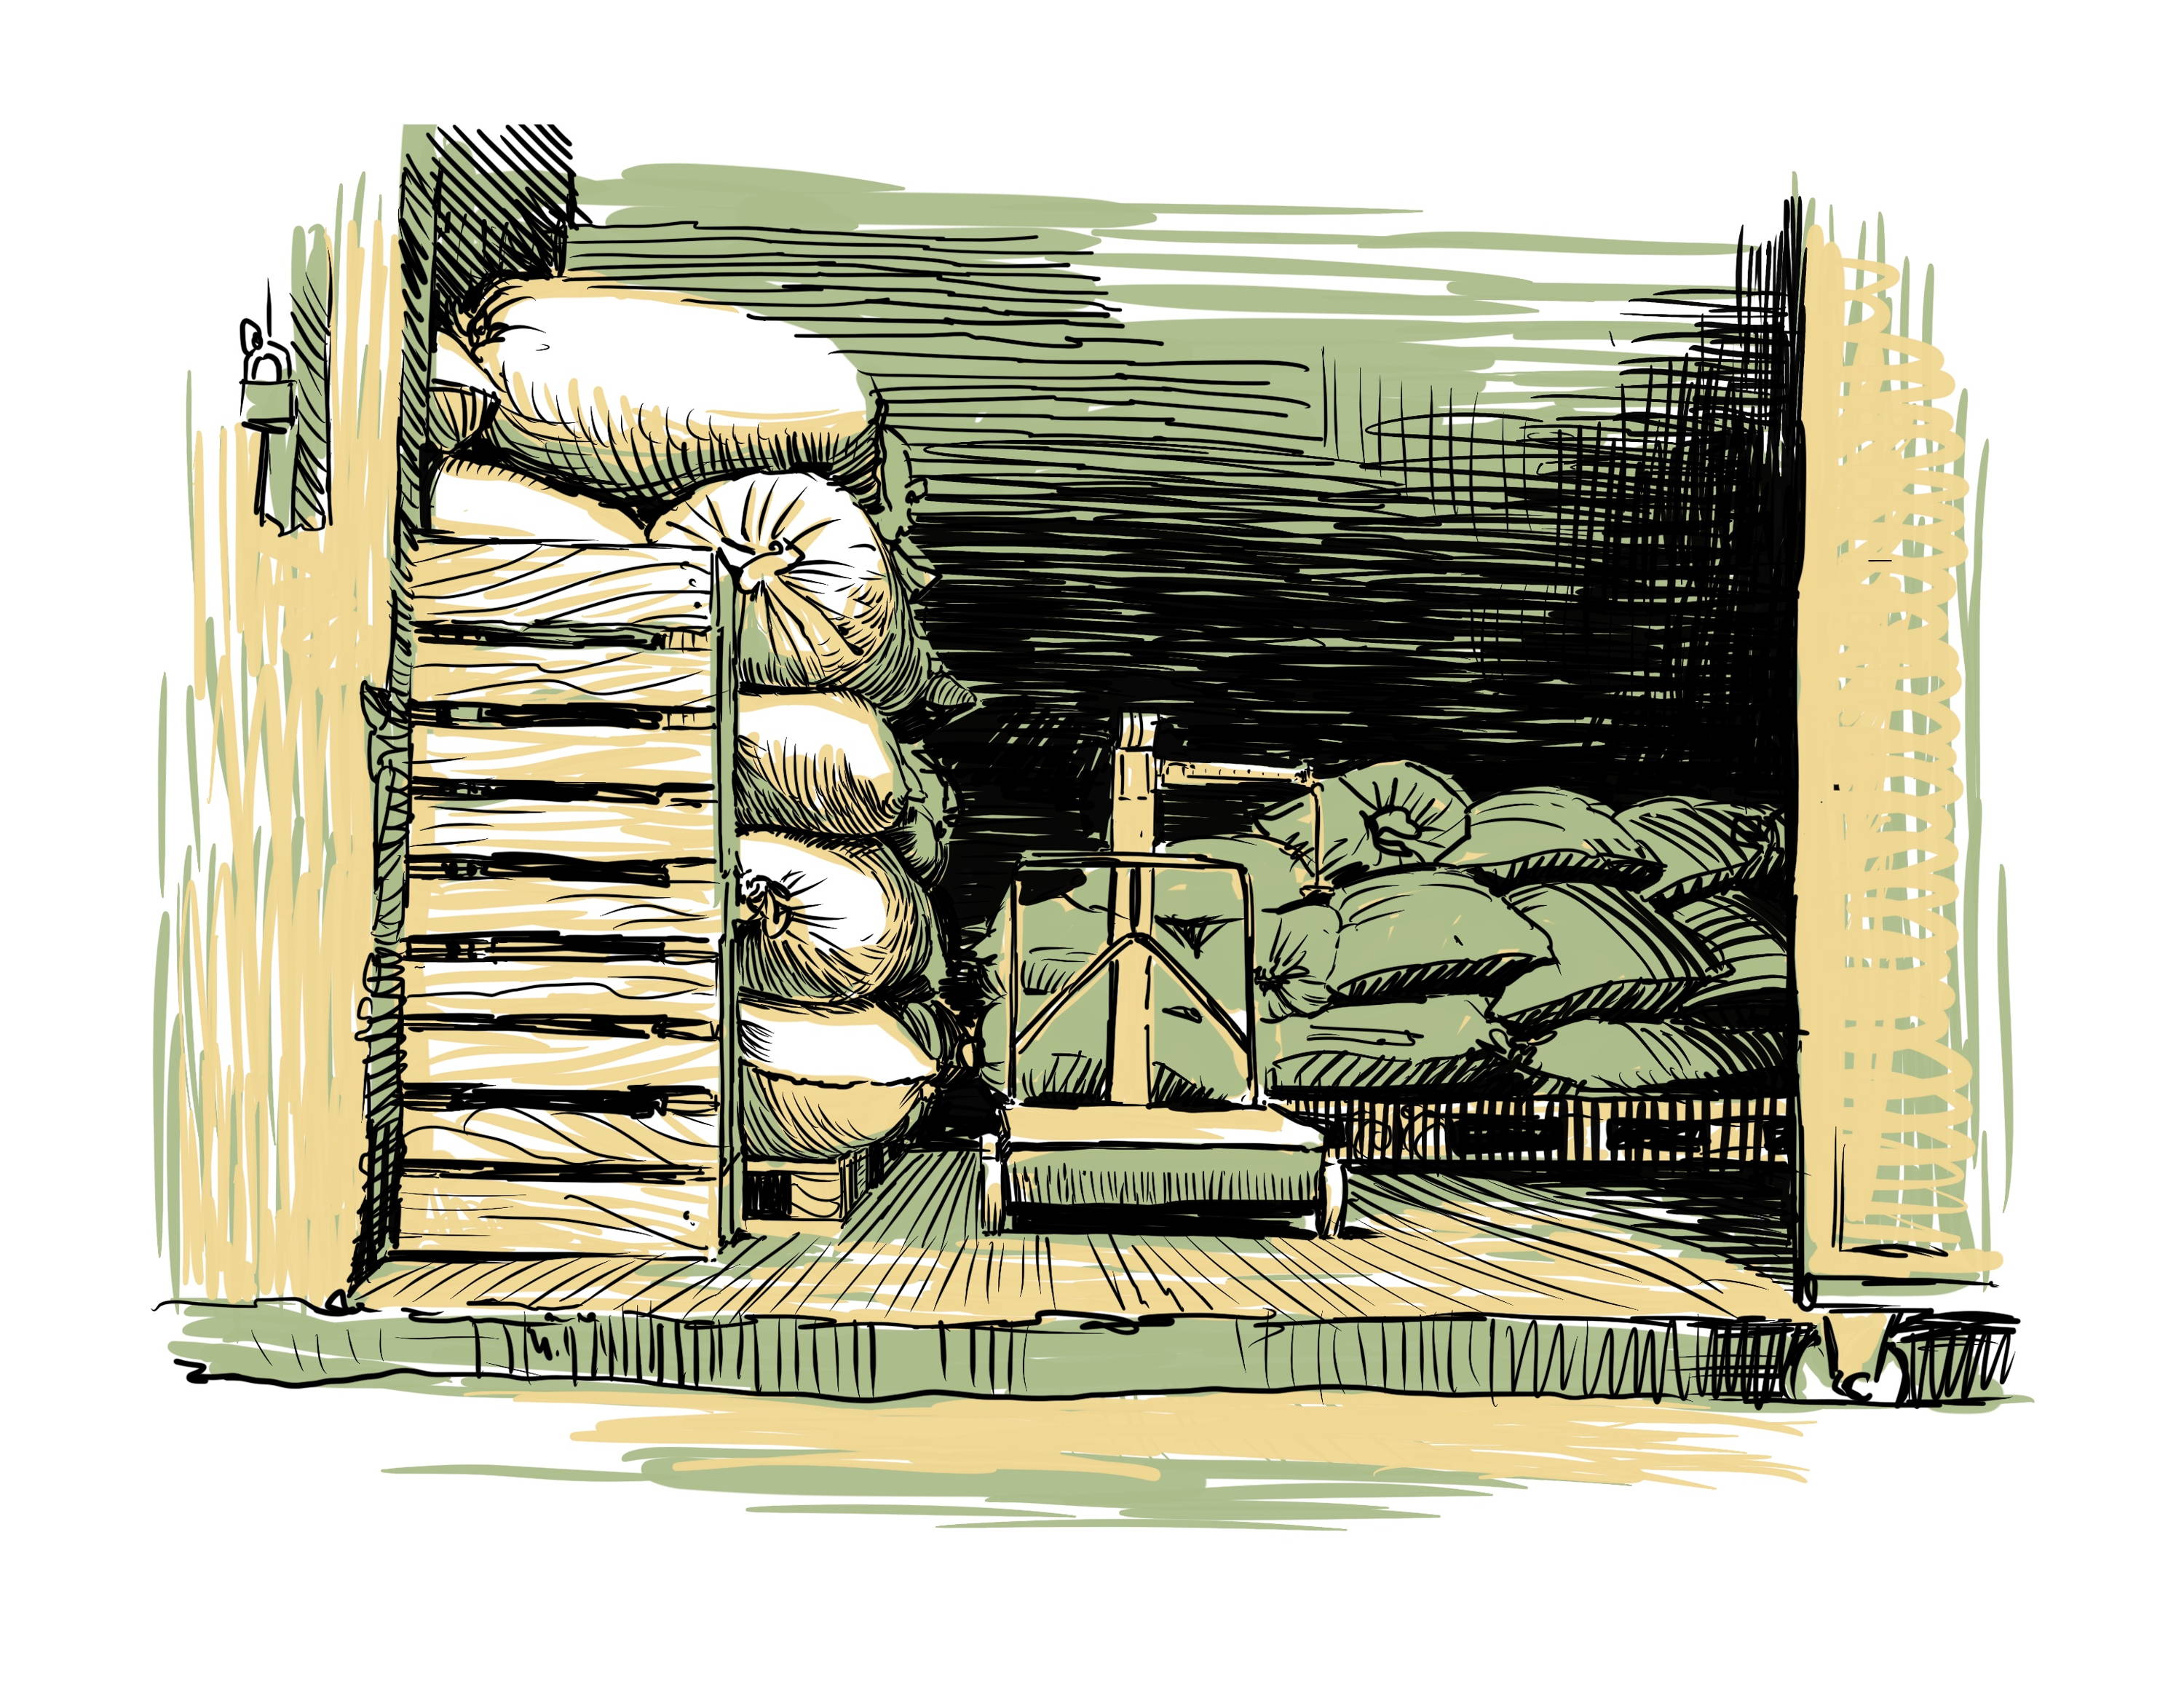 Illustration of cocoa beans in sacks to be exported